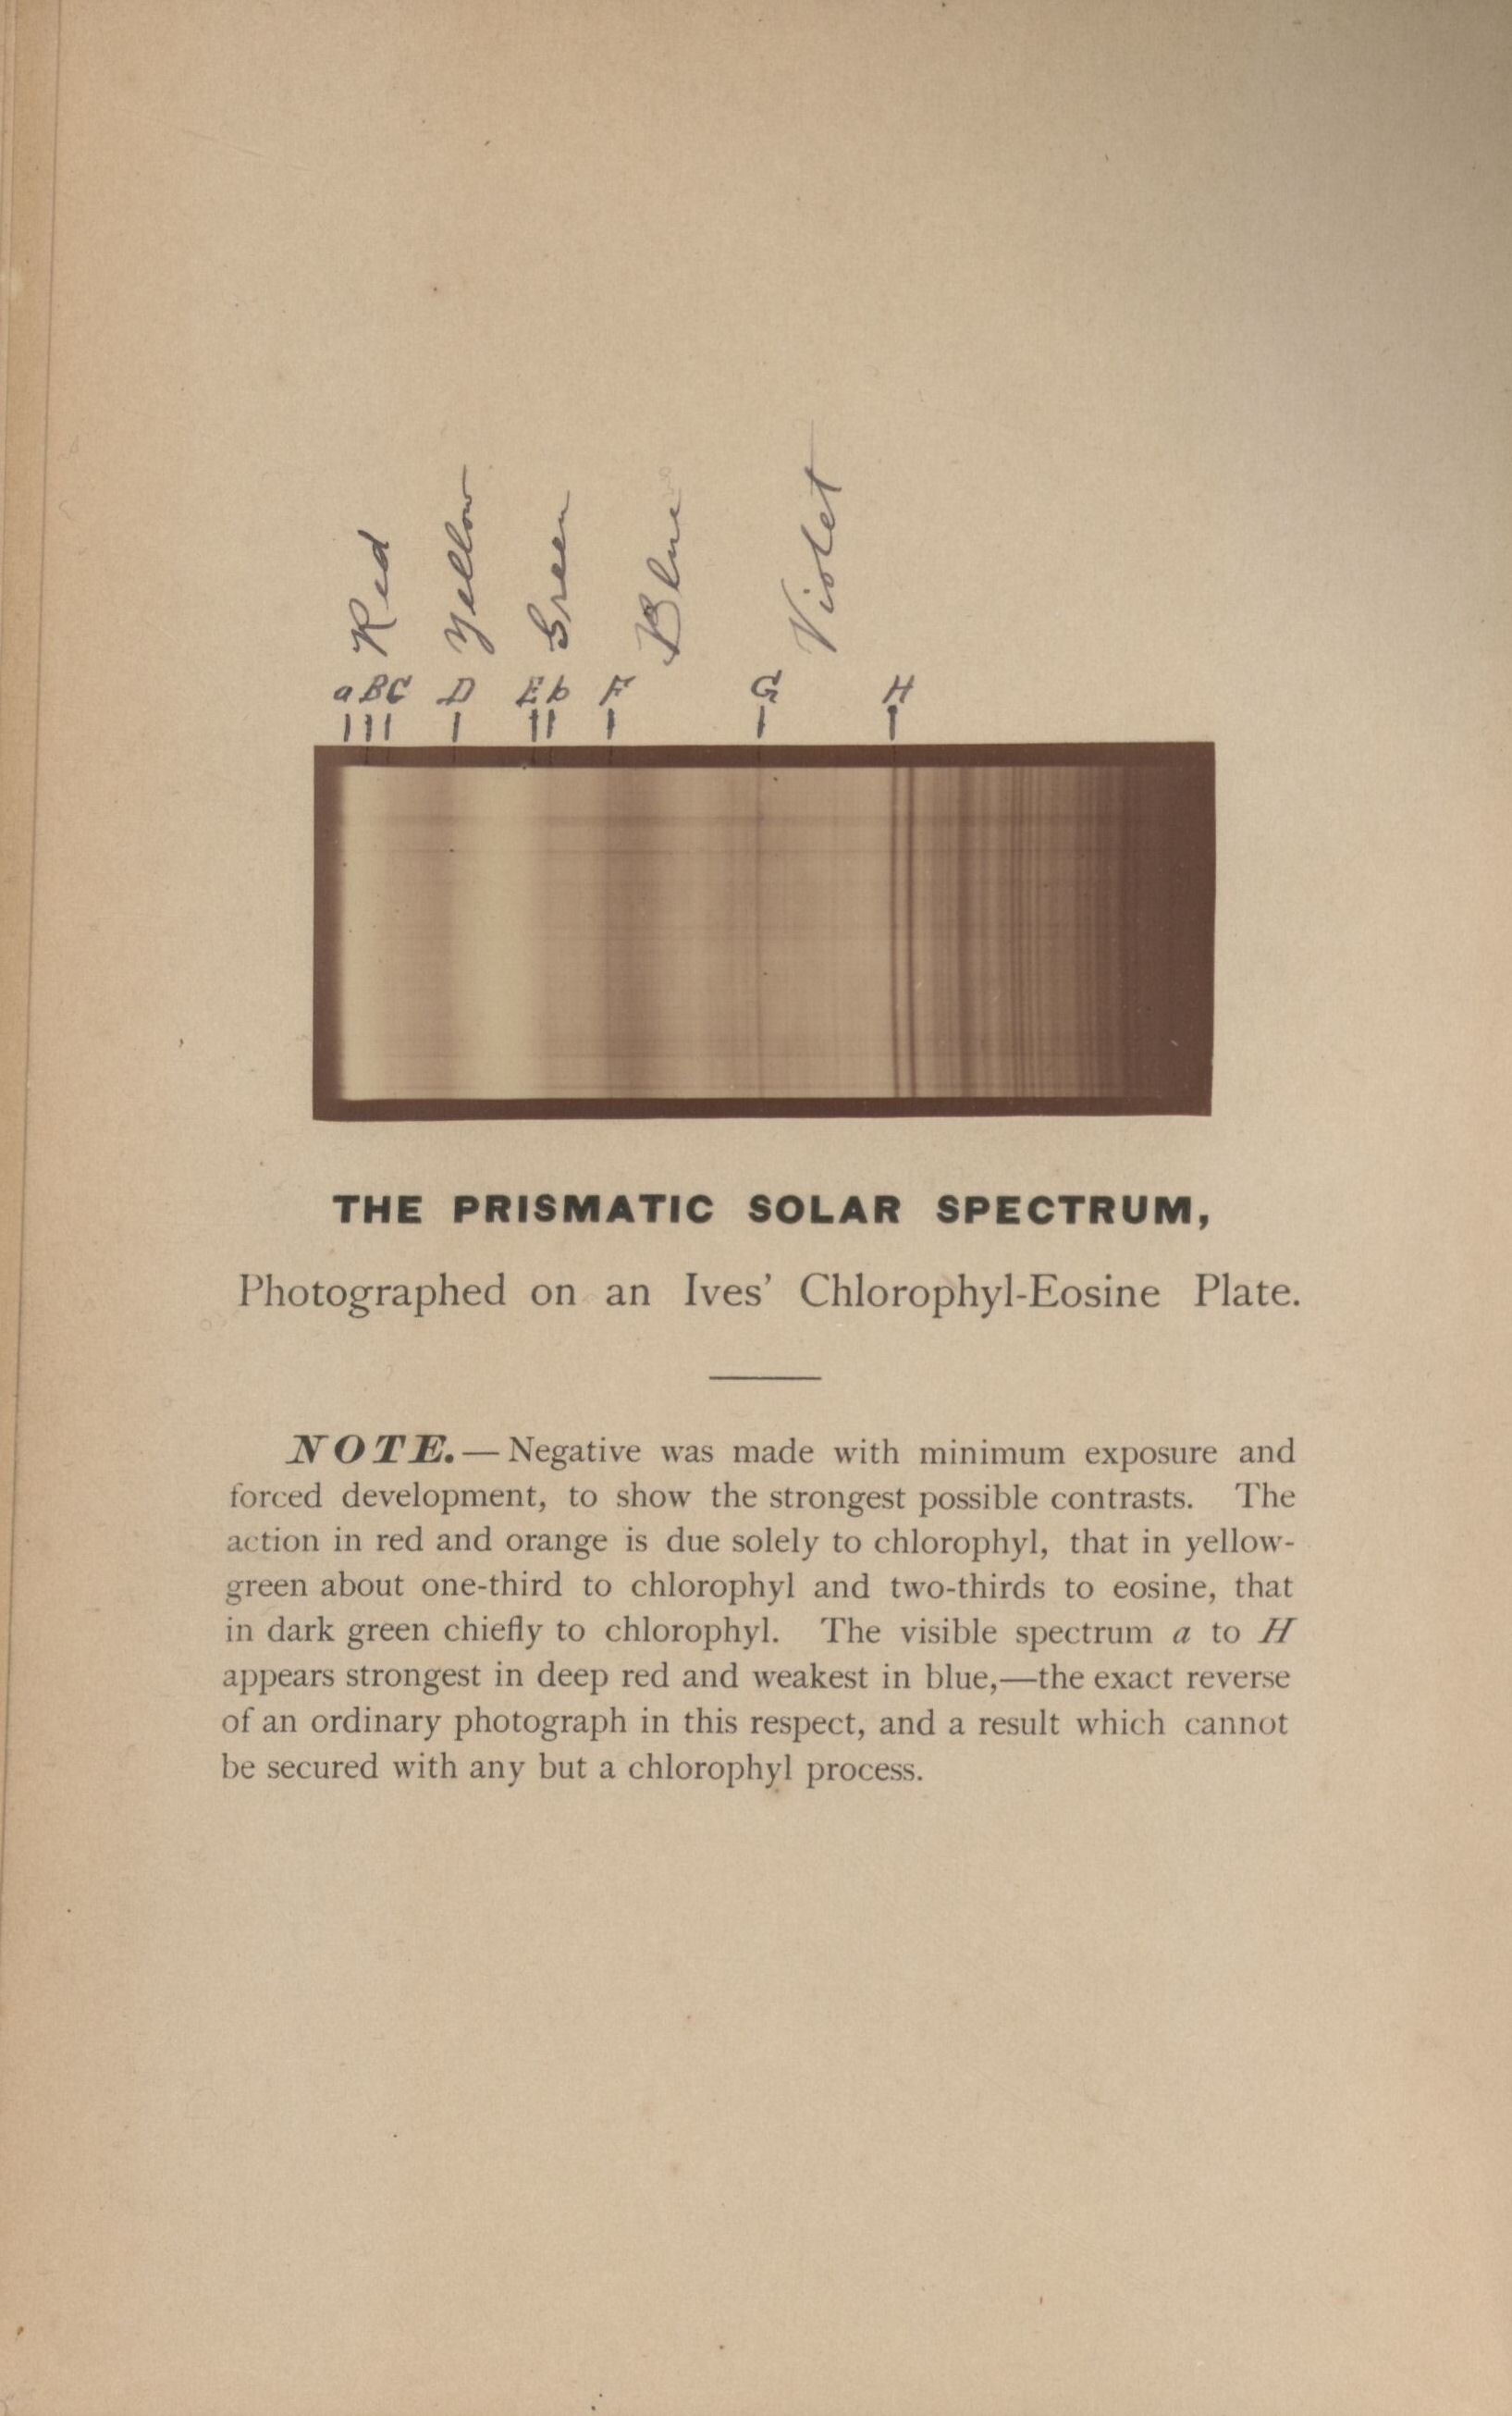   "The Prismatic Solar Spectrum" from Frederic E. Ives,&nbsp;    Isochromatic Photography with Chlorophyl    &nbsp; (Philadelphia: Ives, Frederic Eugene, 1886).  